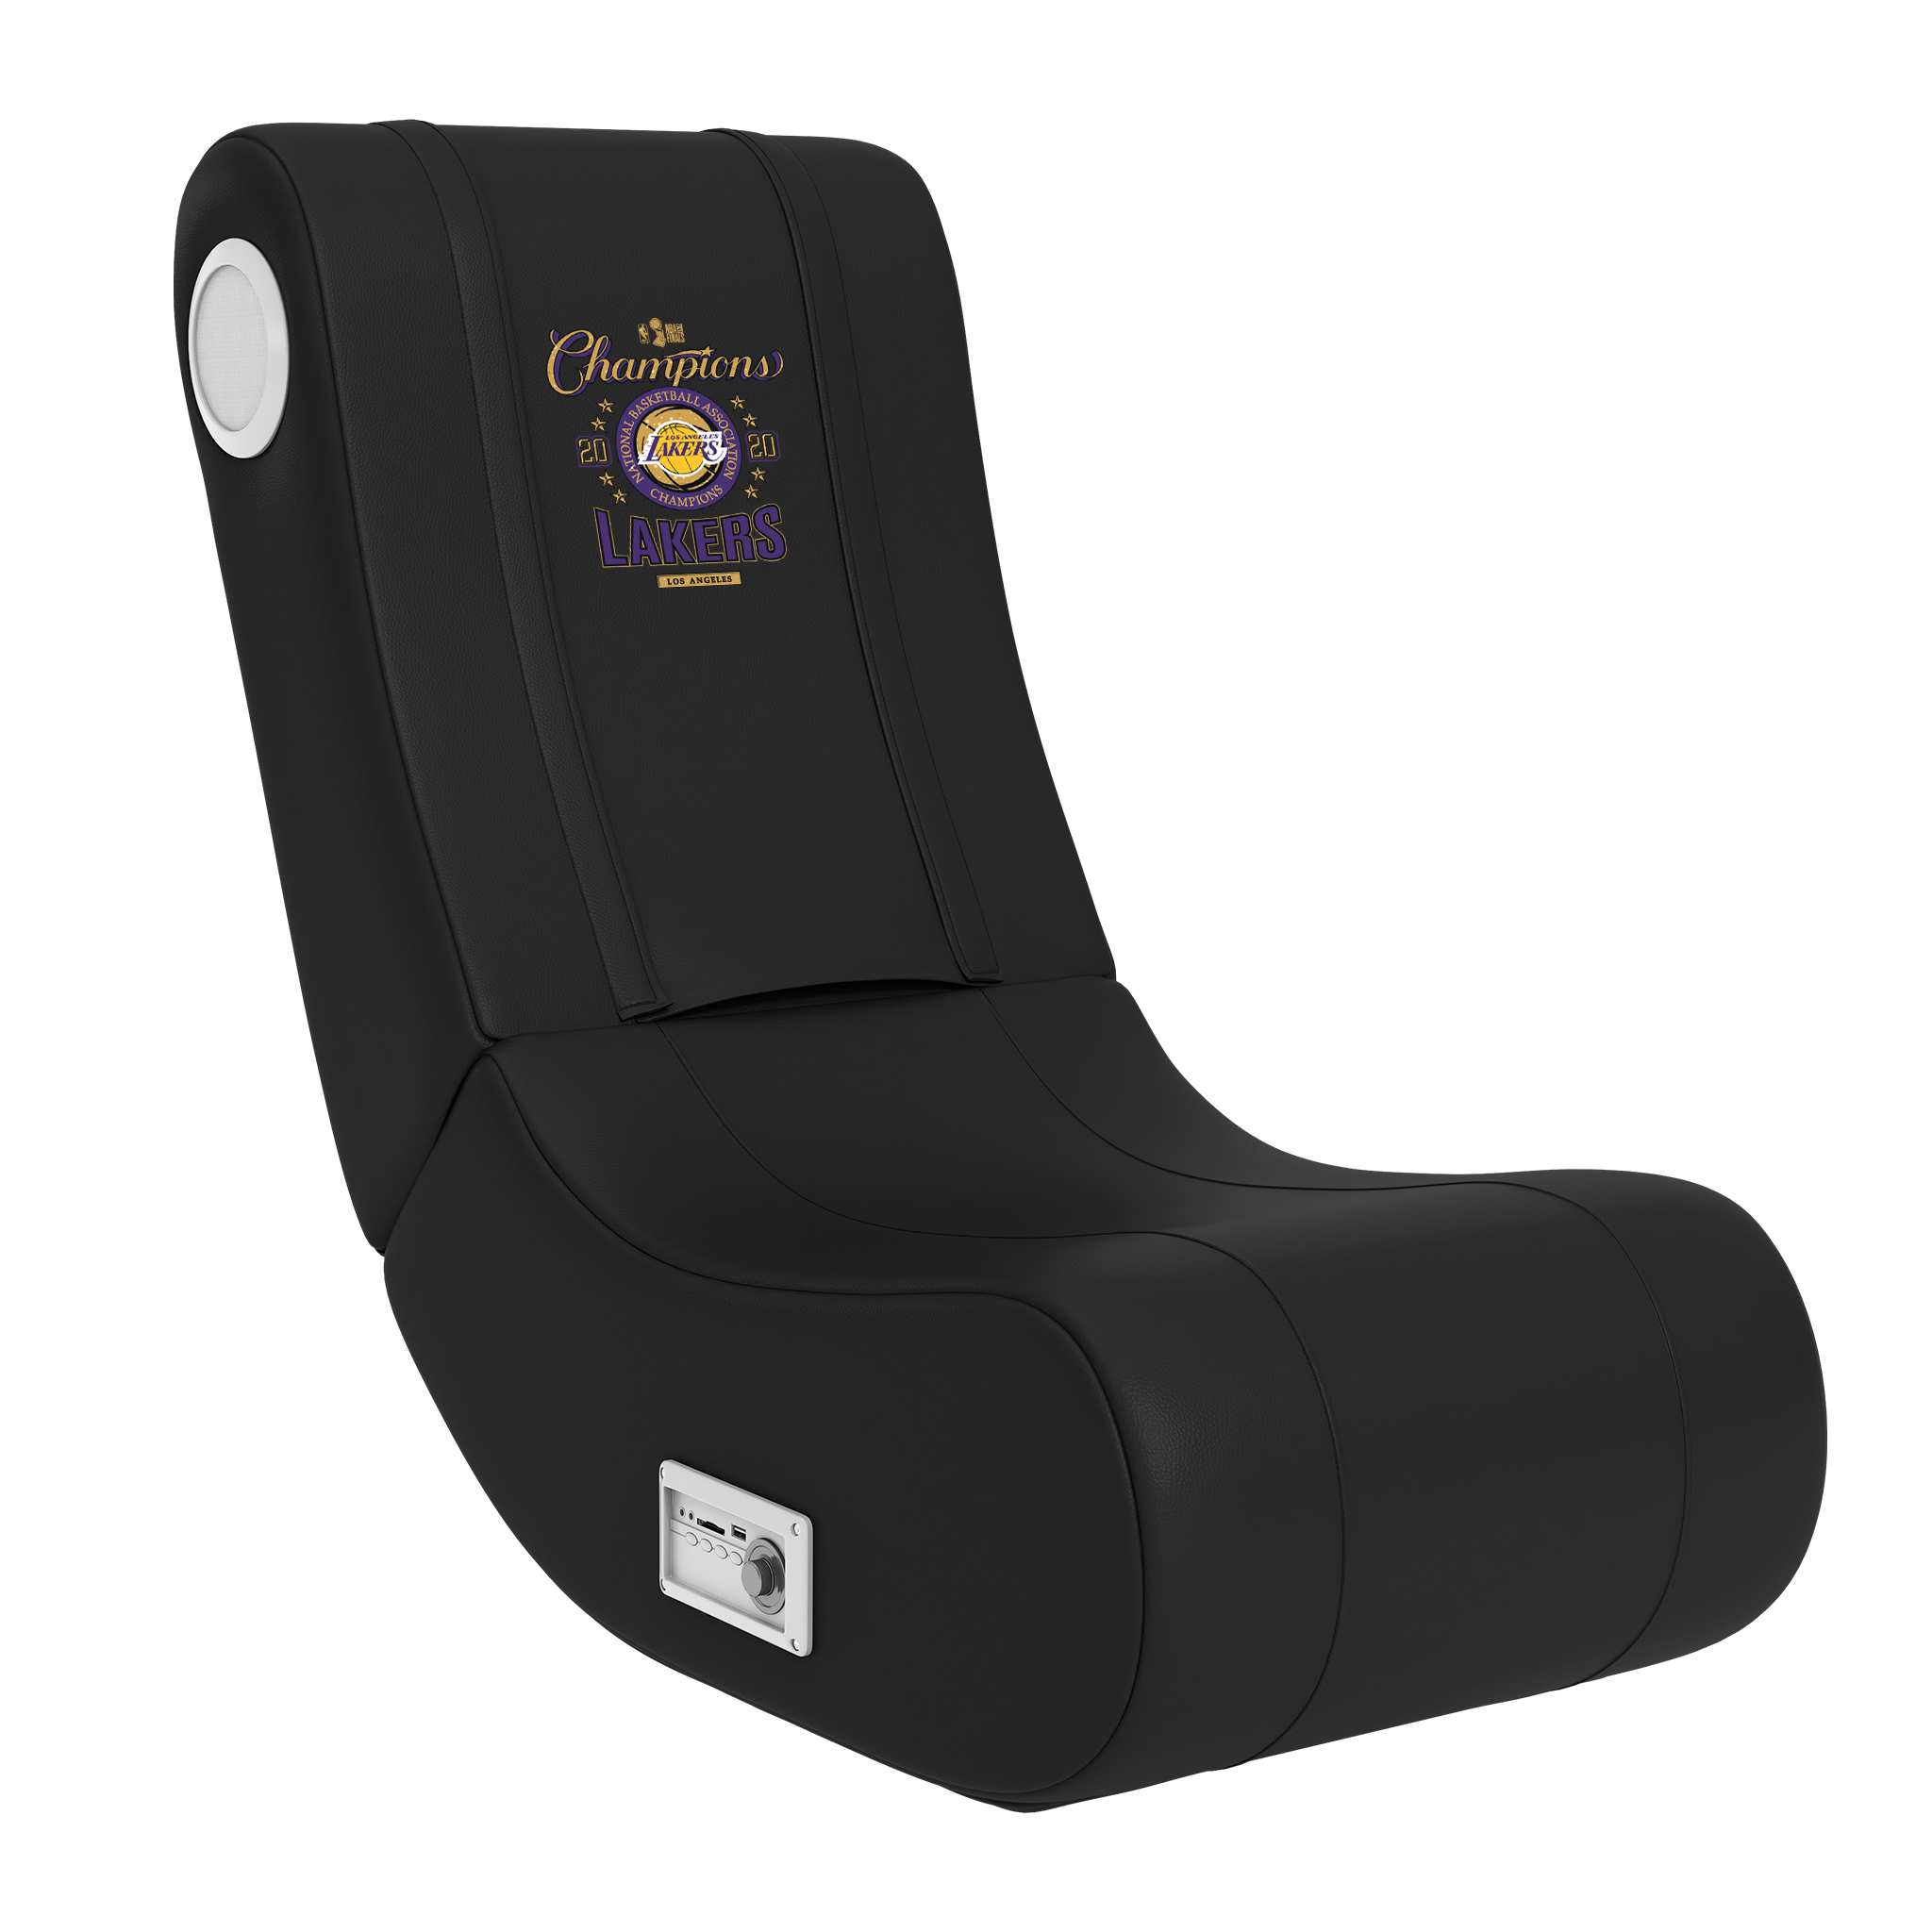 Los Angeles Lakers Game Rocker 100 with Los Angeles Lakers 2020 Champions Logo